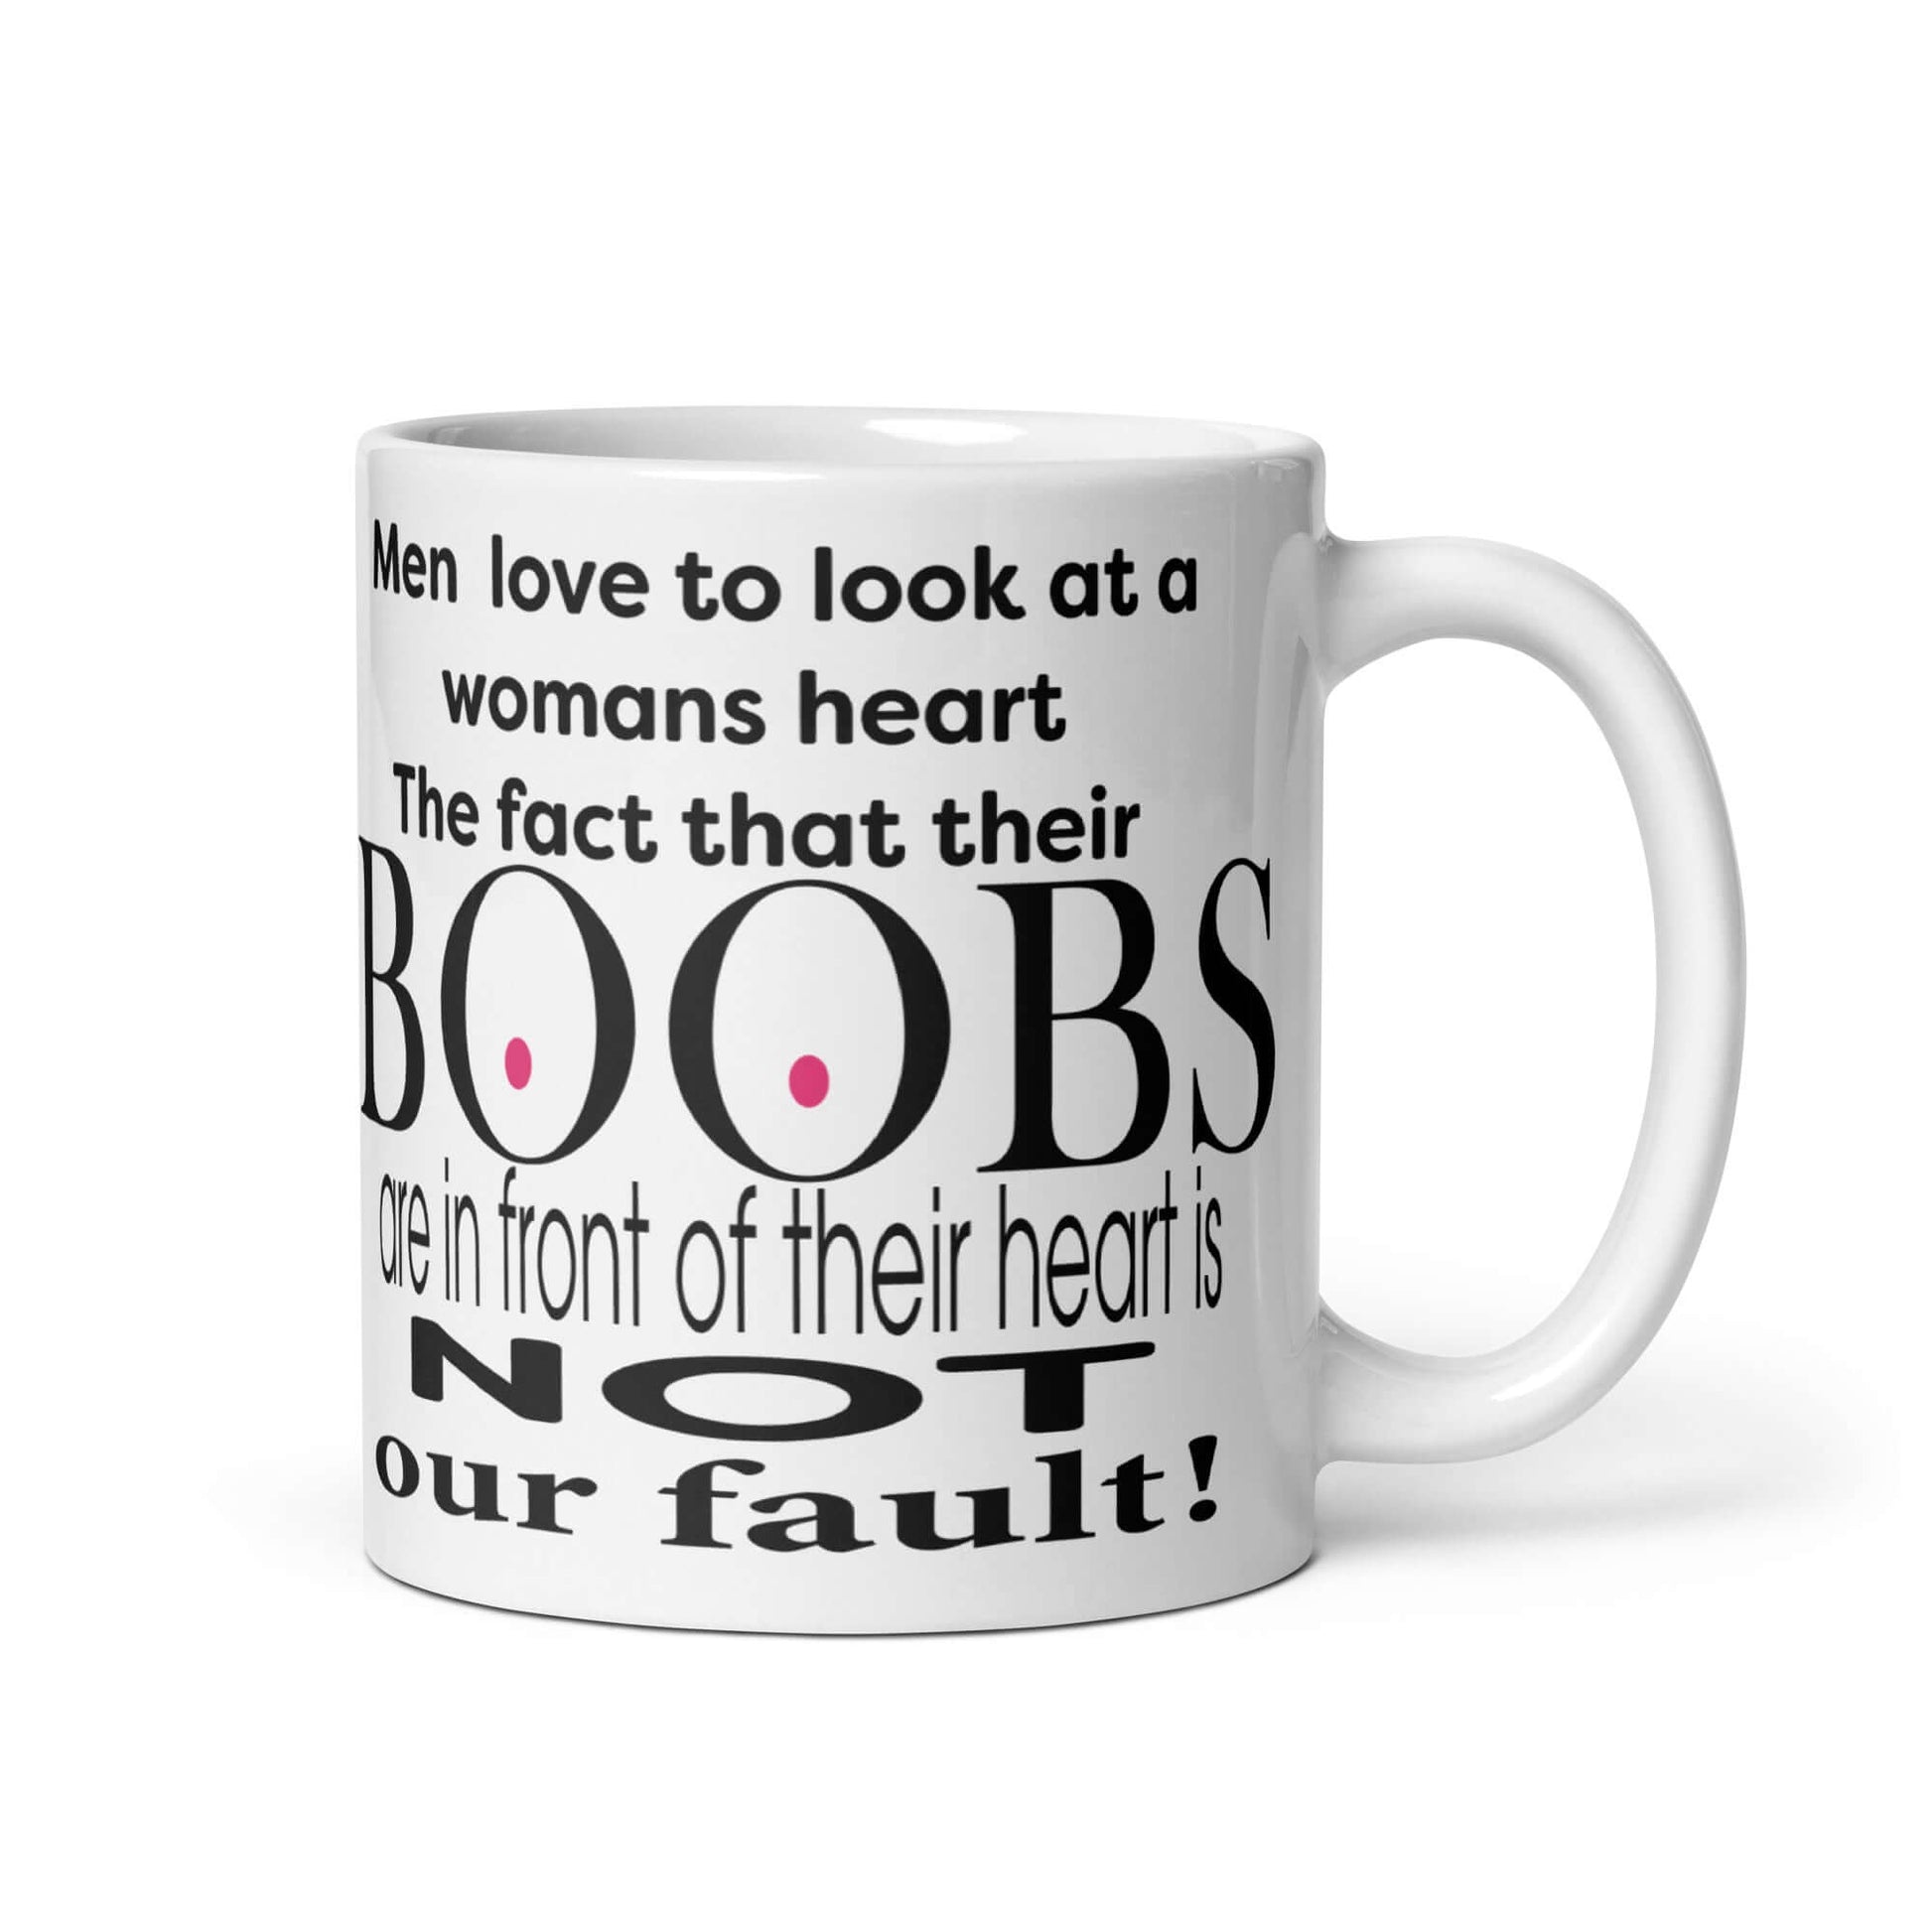 Men love to look at a womans heart. The fact that their BOOBS are in front of their heart is NOT our fault! - White glossy mug bobs boobs breasts Caffeine Coffee Addiction Coffee Beans Coffee Break Coffee Humor Coffee is Life Coffee Lover Coffee Shop Coffee Snob Coffee Time Espresso Funny Quotes Humor Java Keep Calm and Drink Coffee knockers Latte melons Mocha Morning Procaffeinating Sarcasm tiddies titties Wordplay